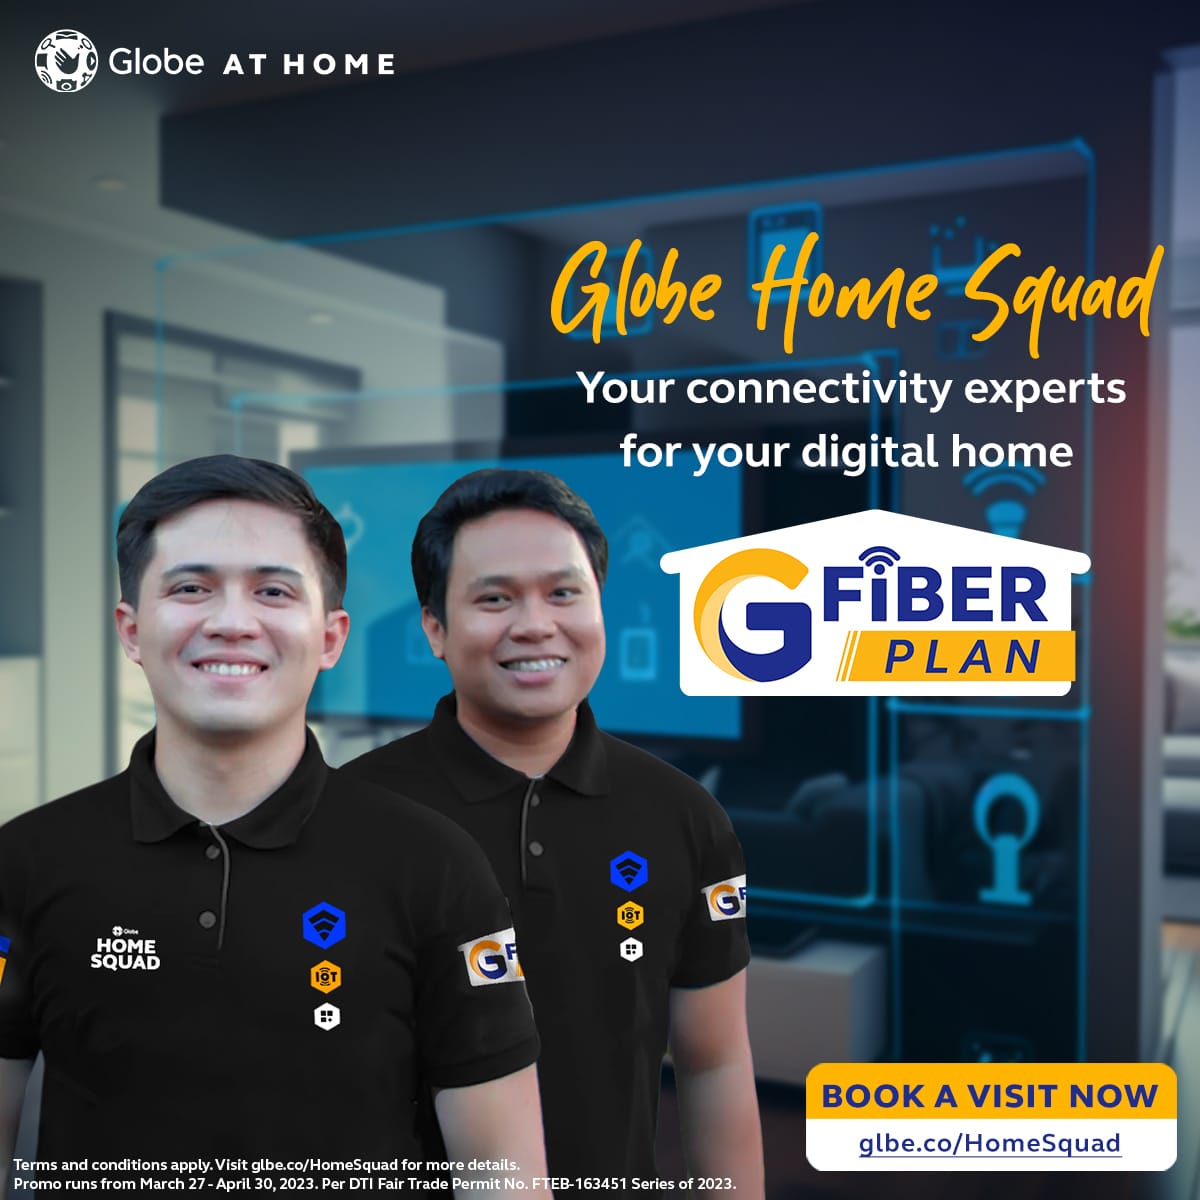 Globe At Home delivers new level of care and innovation with Globe Home Squad